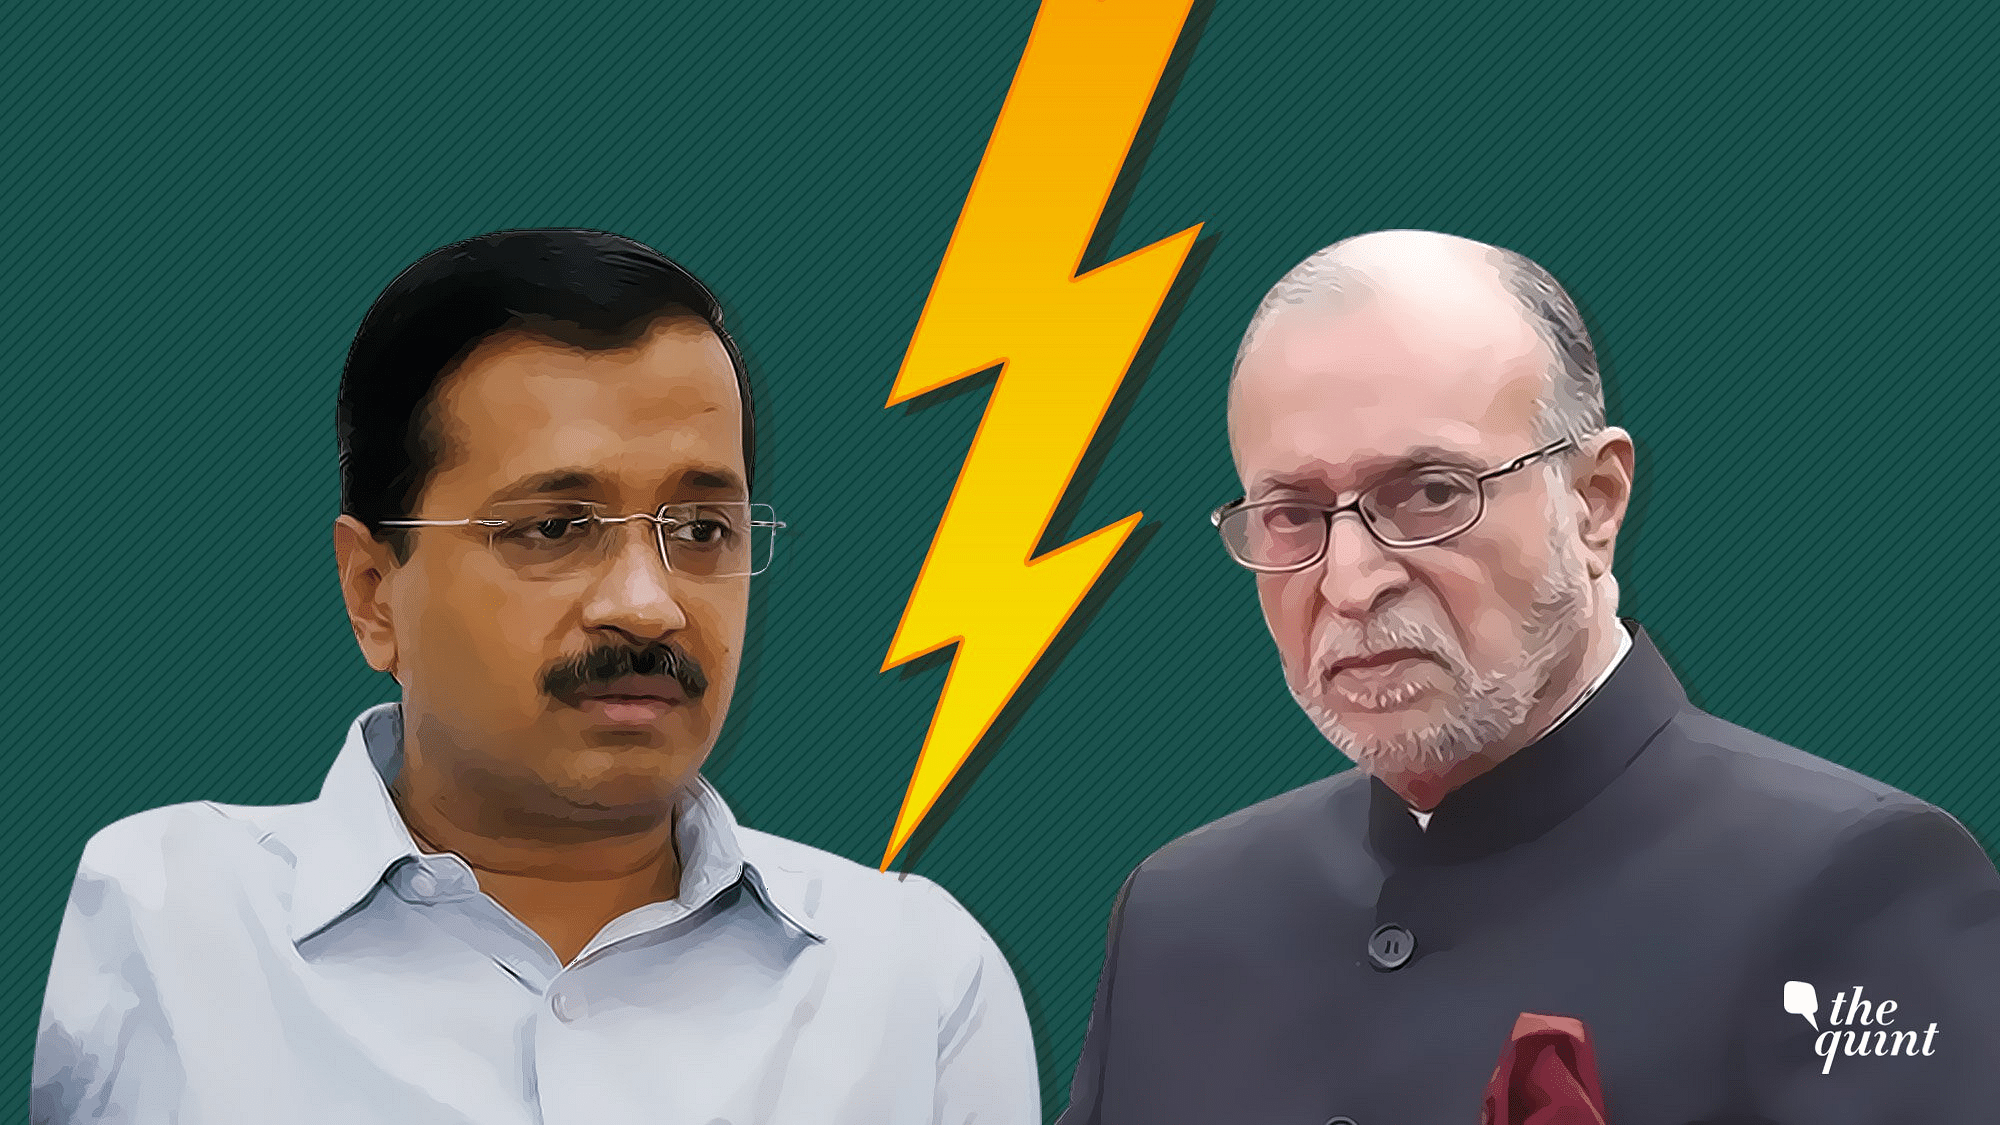 LG Baijal returned a file sent by Delhi’s revenue minister that had asked for postponement of JEE Main &amp; NEET UG.